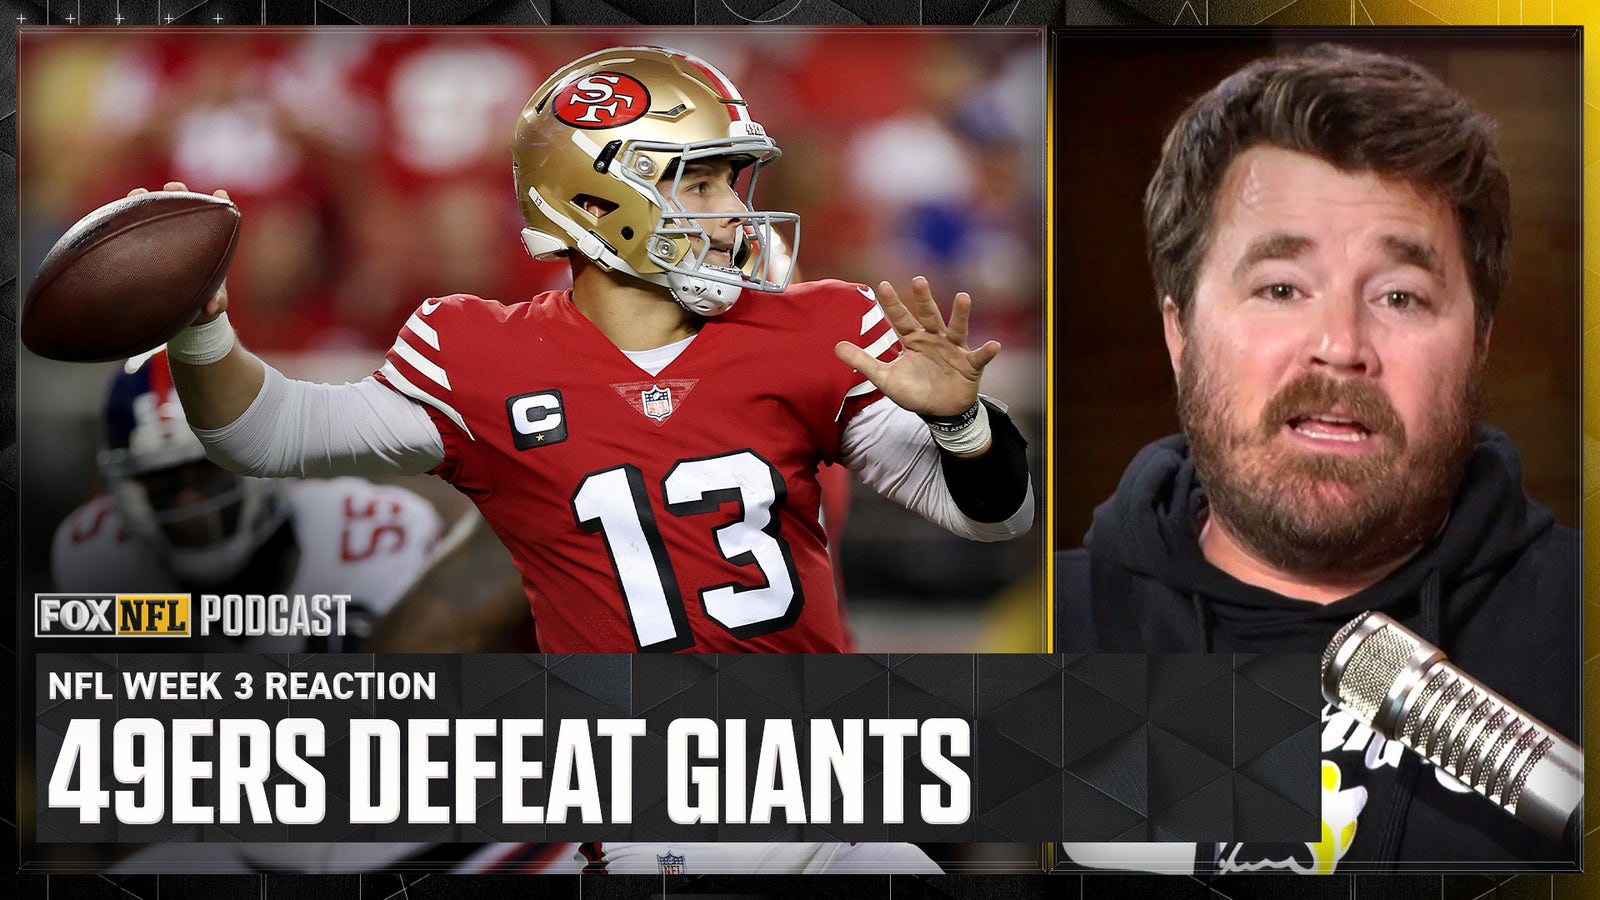 Dave Helman reacts to 49ers' victory over Giants 